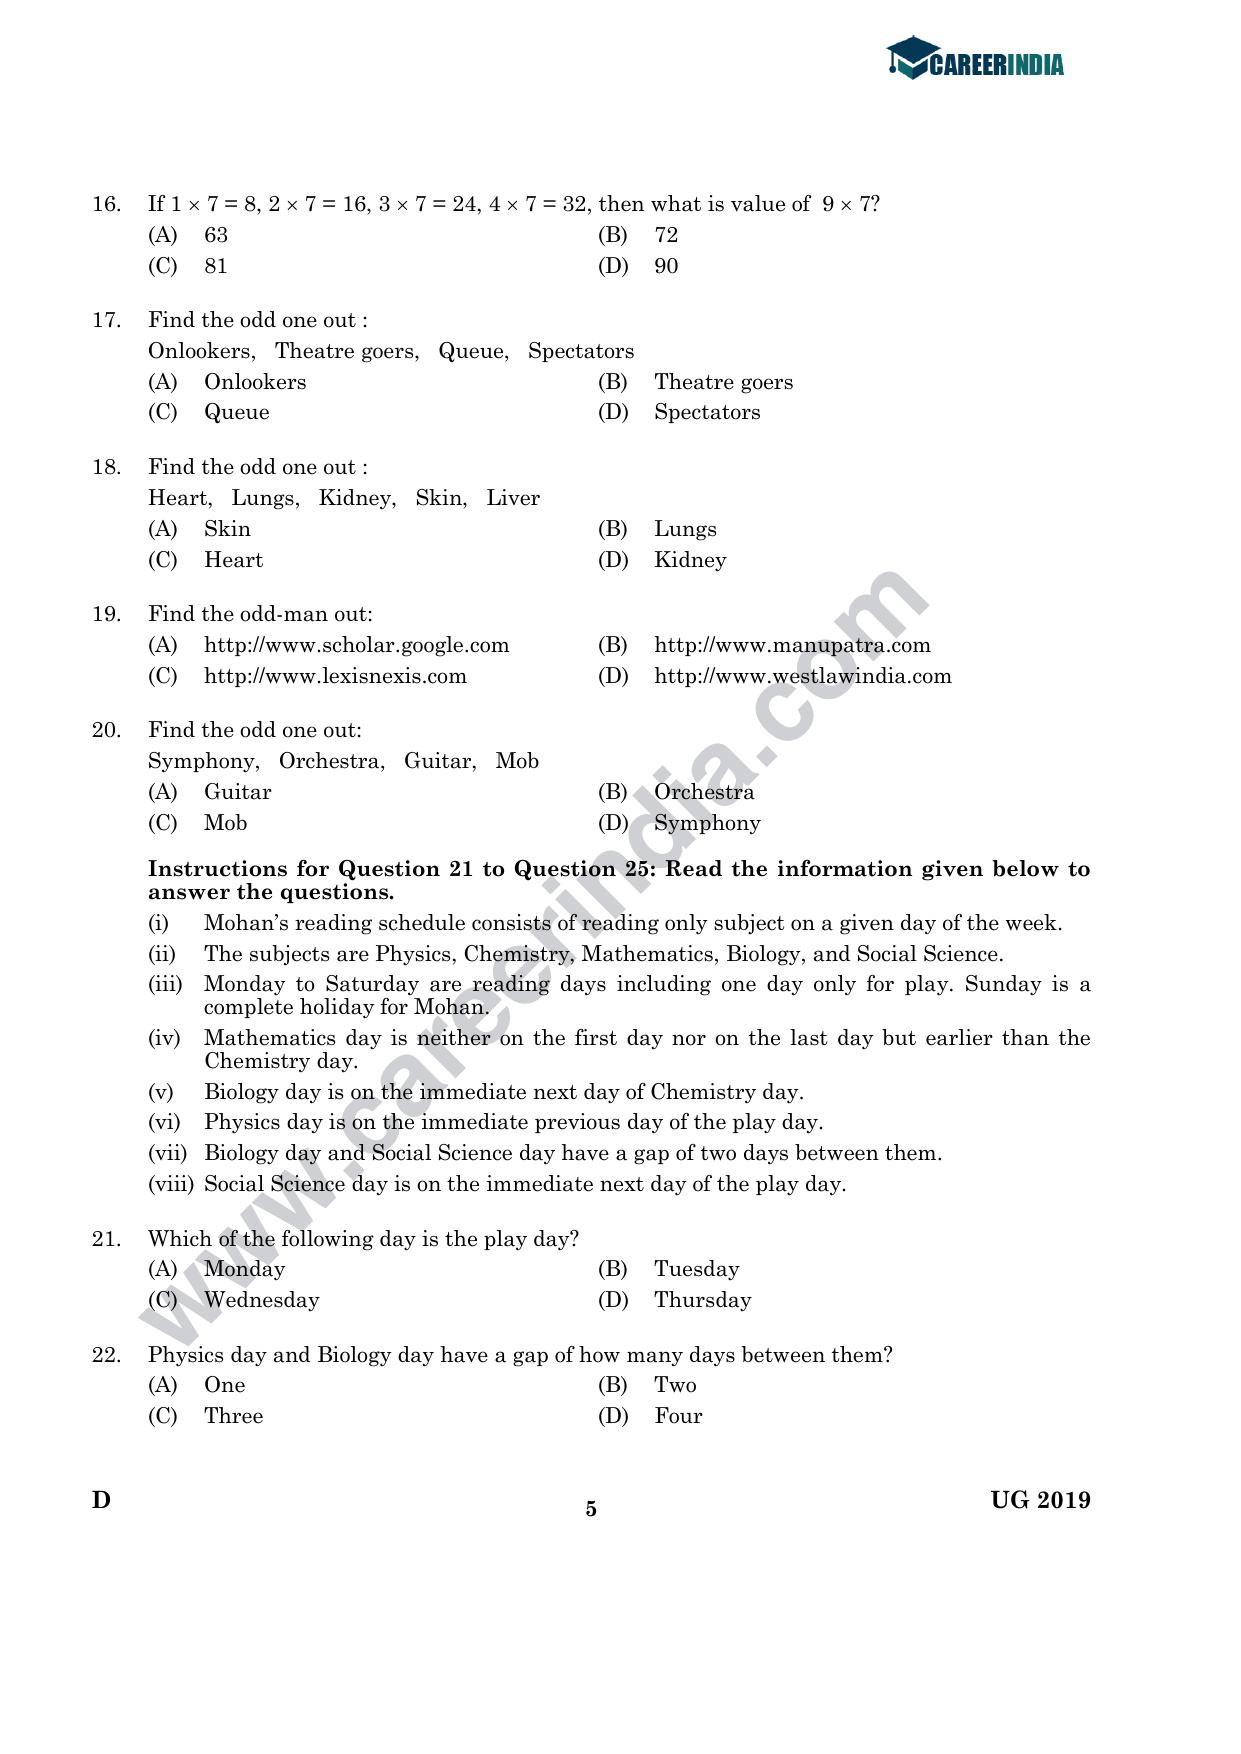 CLAT 2019 UG Logical-Reasoning Question Paper - Page 4